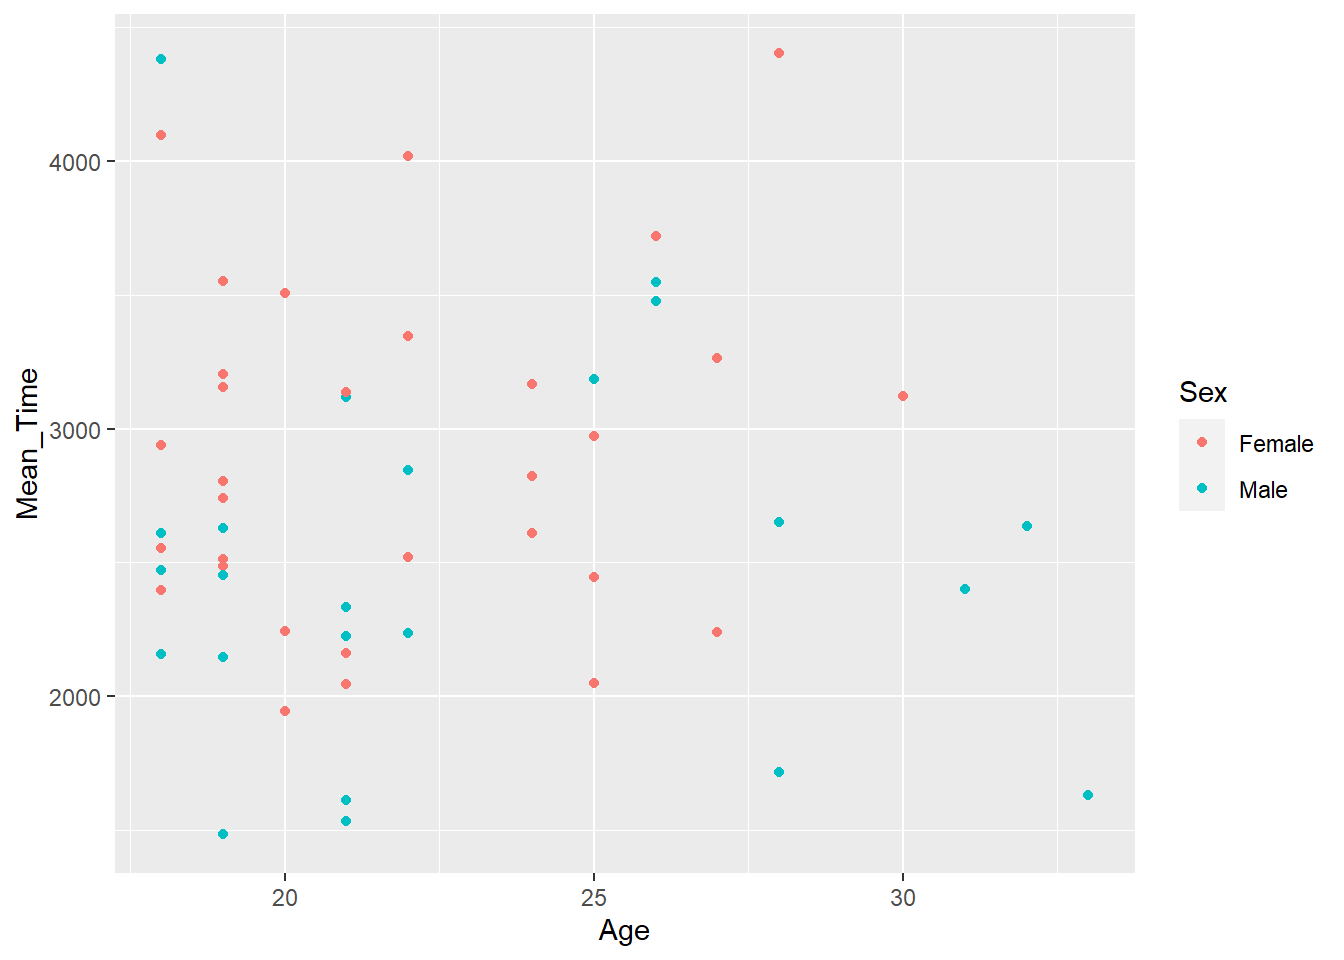 A scatterplot of Mean Time as a function of Age